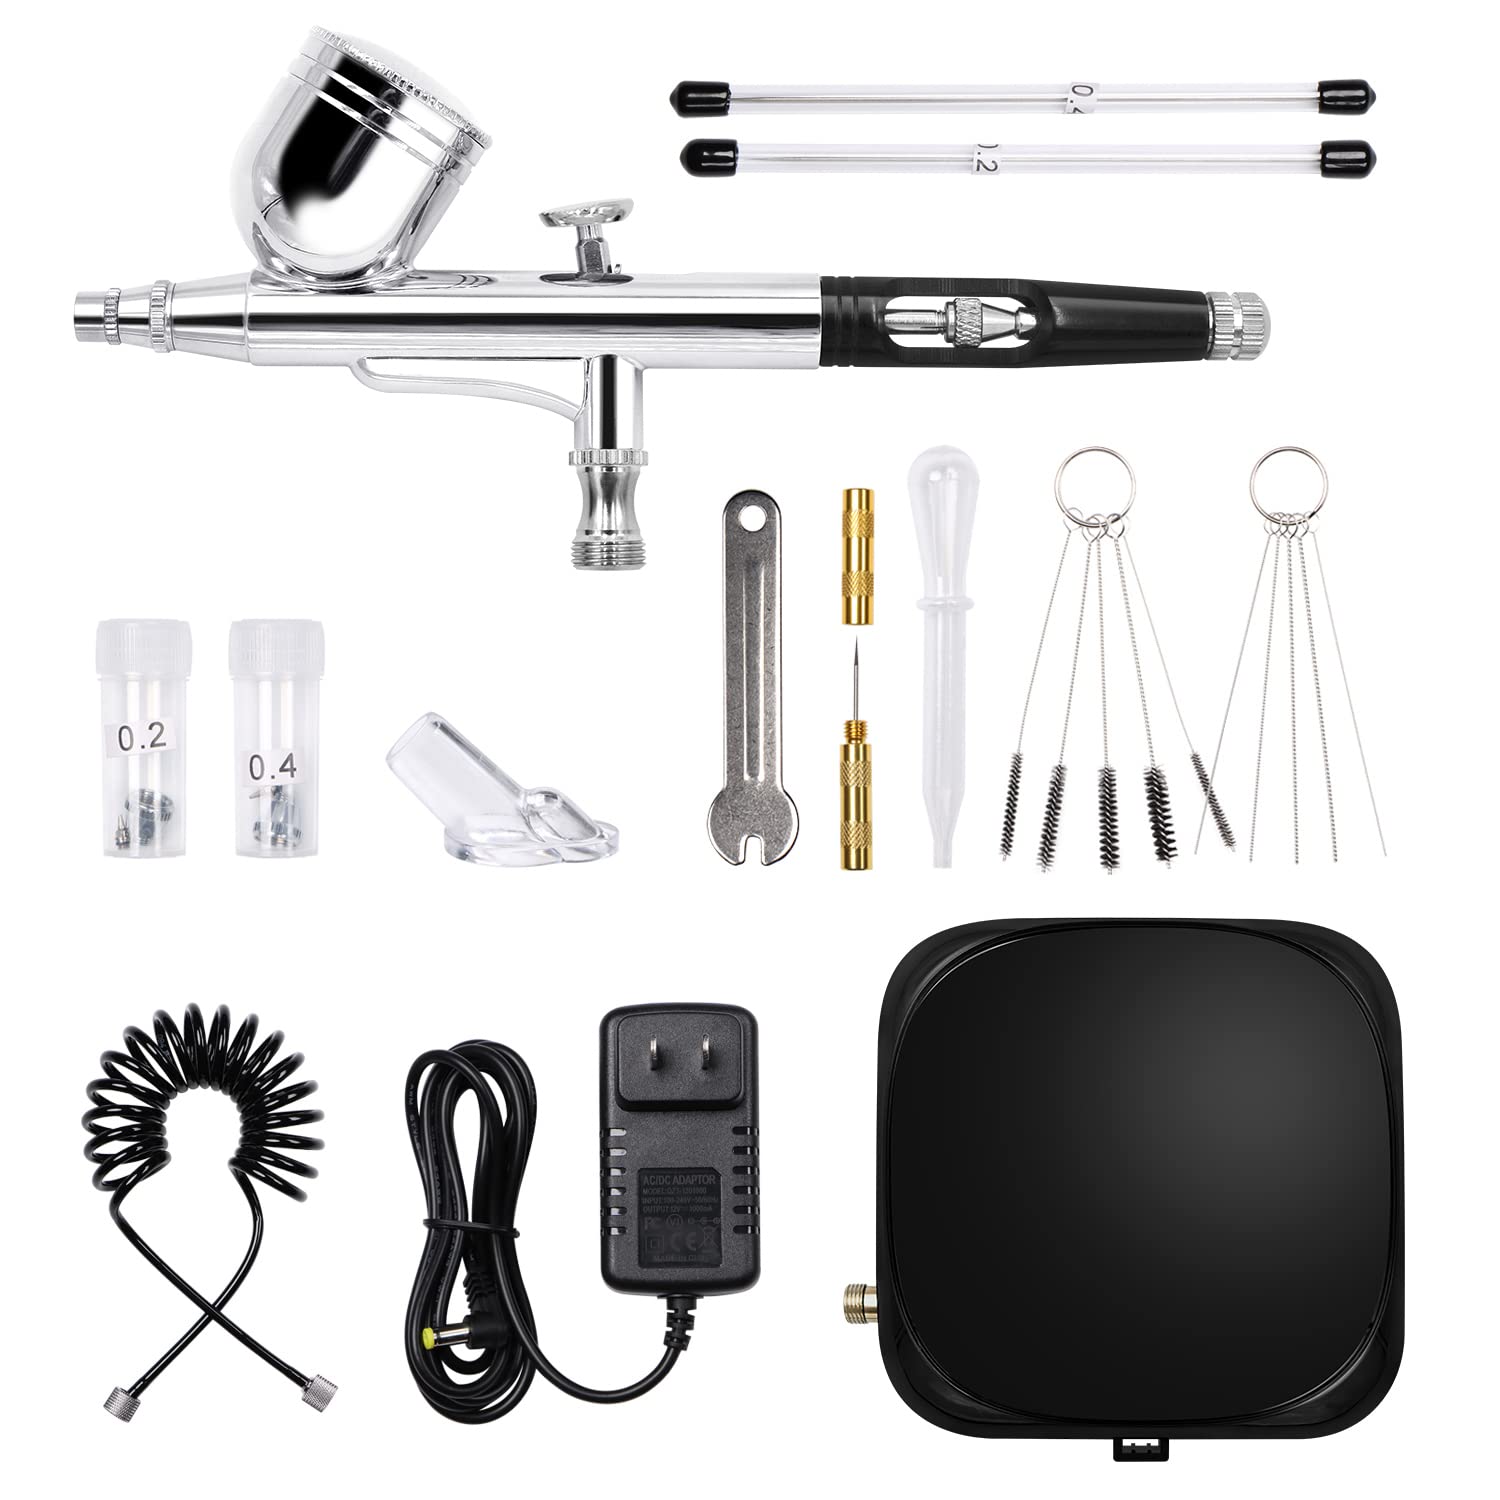  COSVII 40 PSI Airbrush Kit, Multi-Function Dual-Action Airbrush  Set, Air Brush Kit with Air Compressor 3 Gears Pressure Adjustable for  Painting Art Model Makeup Nail Cake Decorating Tattoo : Arts, Crafts